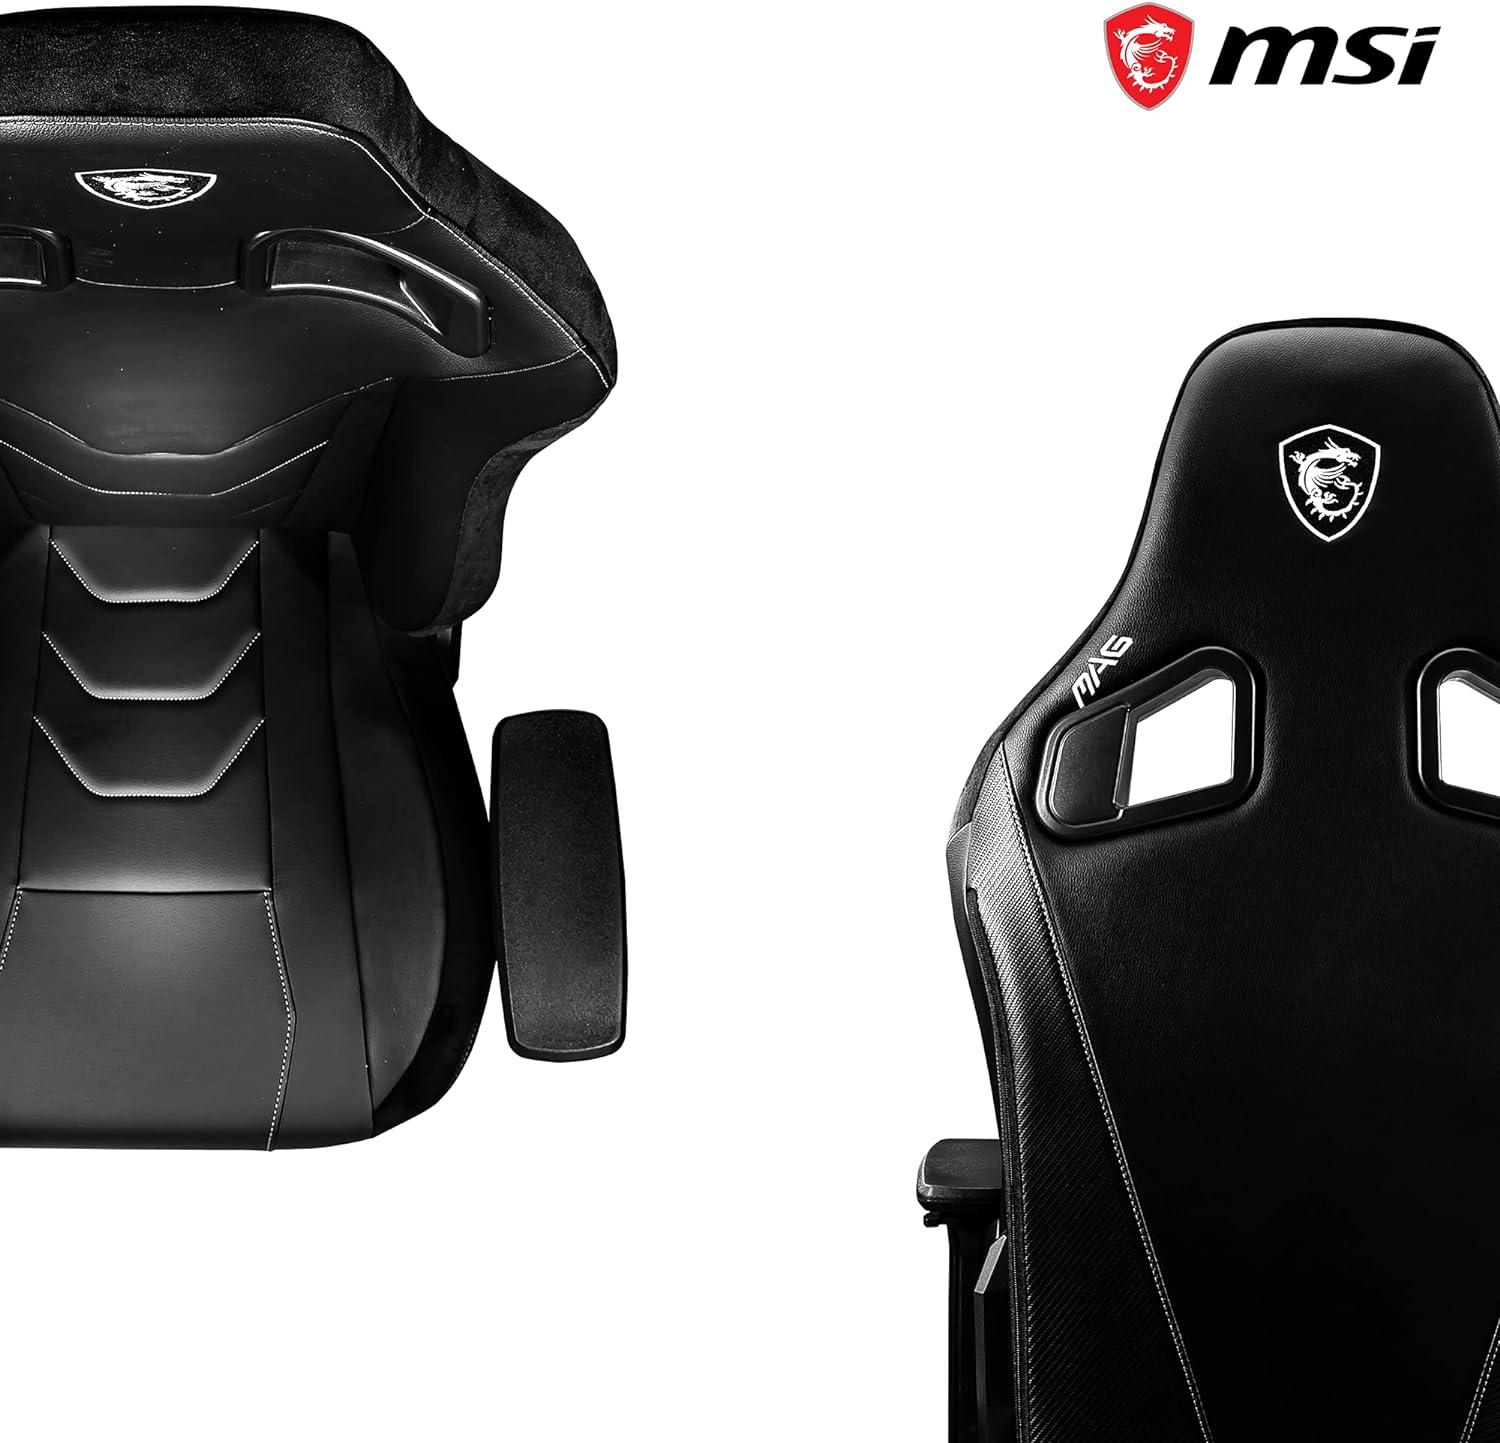 Ergonomic MAG CH130 X Gaming Chair - High-density foam, full recline up to 150 degrees, tailored for 165-185 cm height range. 4719072795443